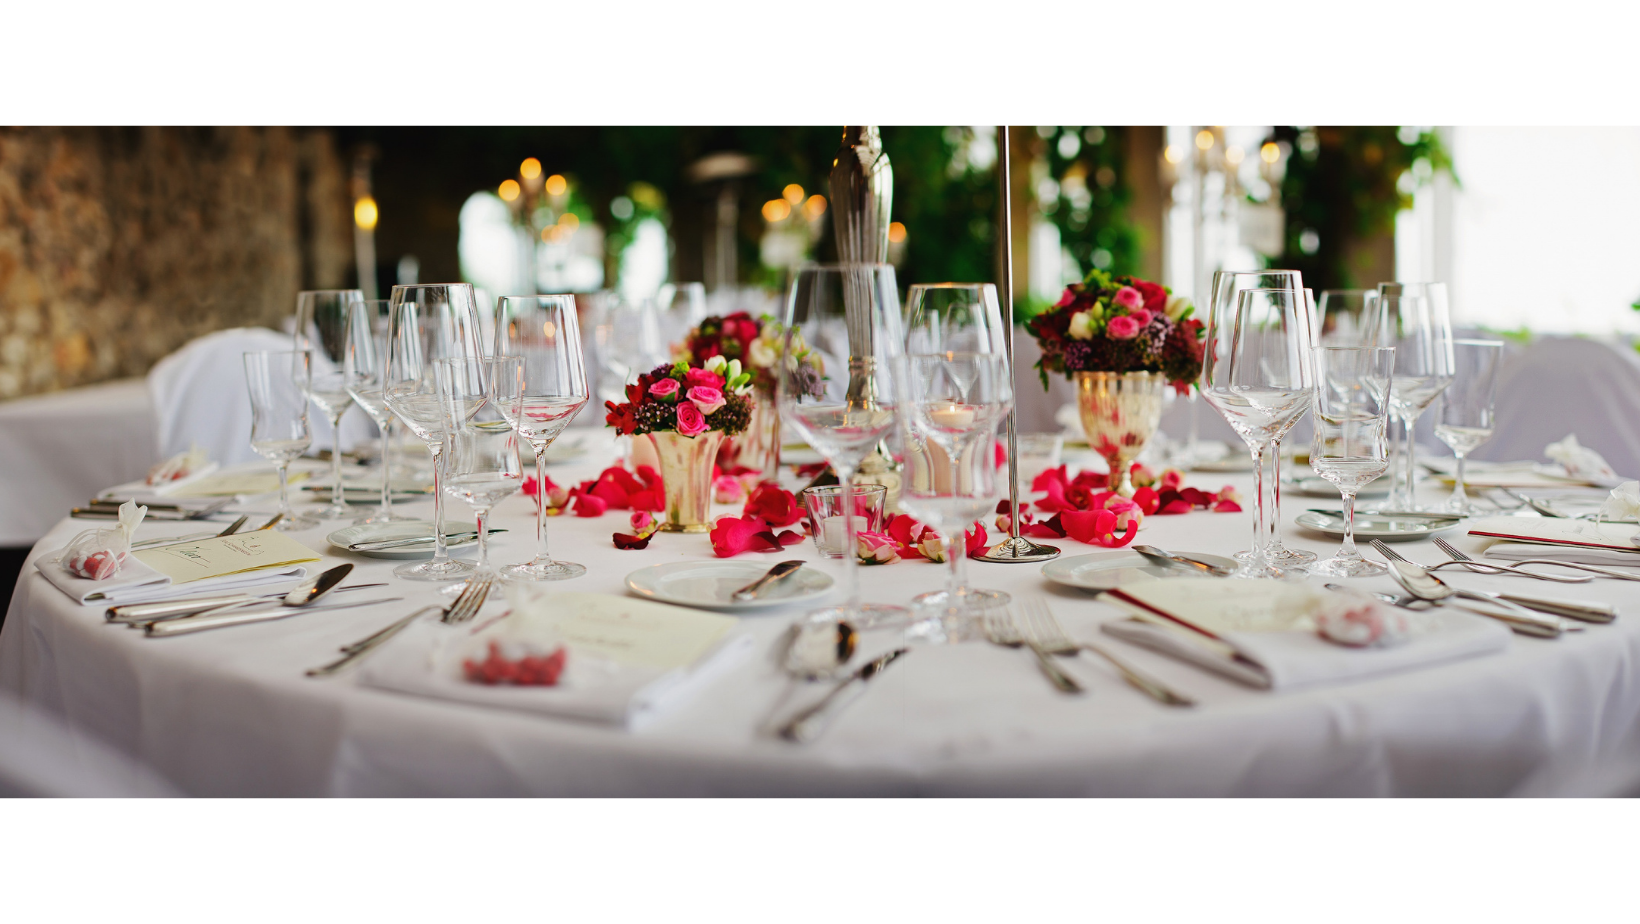 Formal dinner table set with cutlery, wine glasses and flowers.